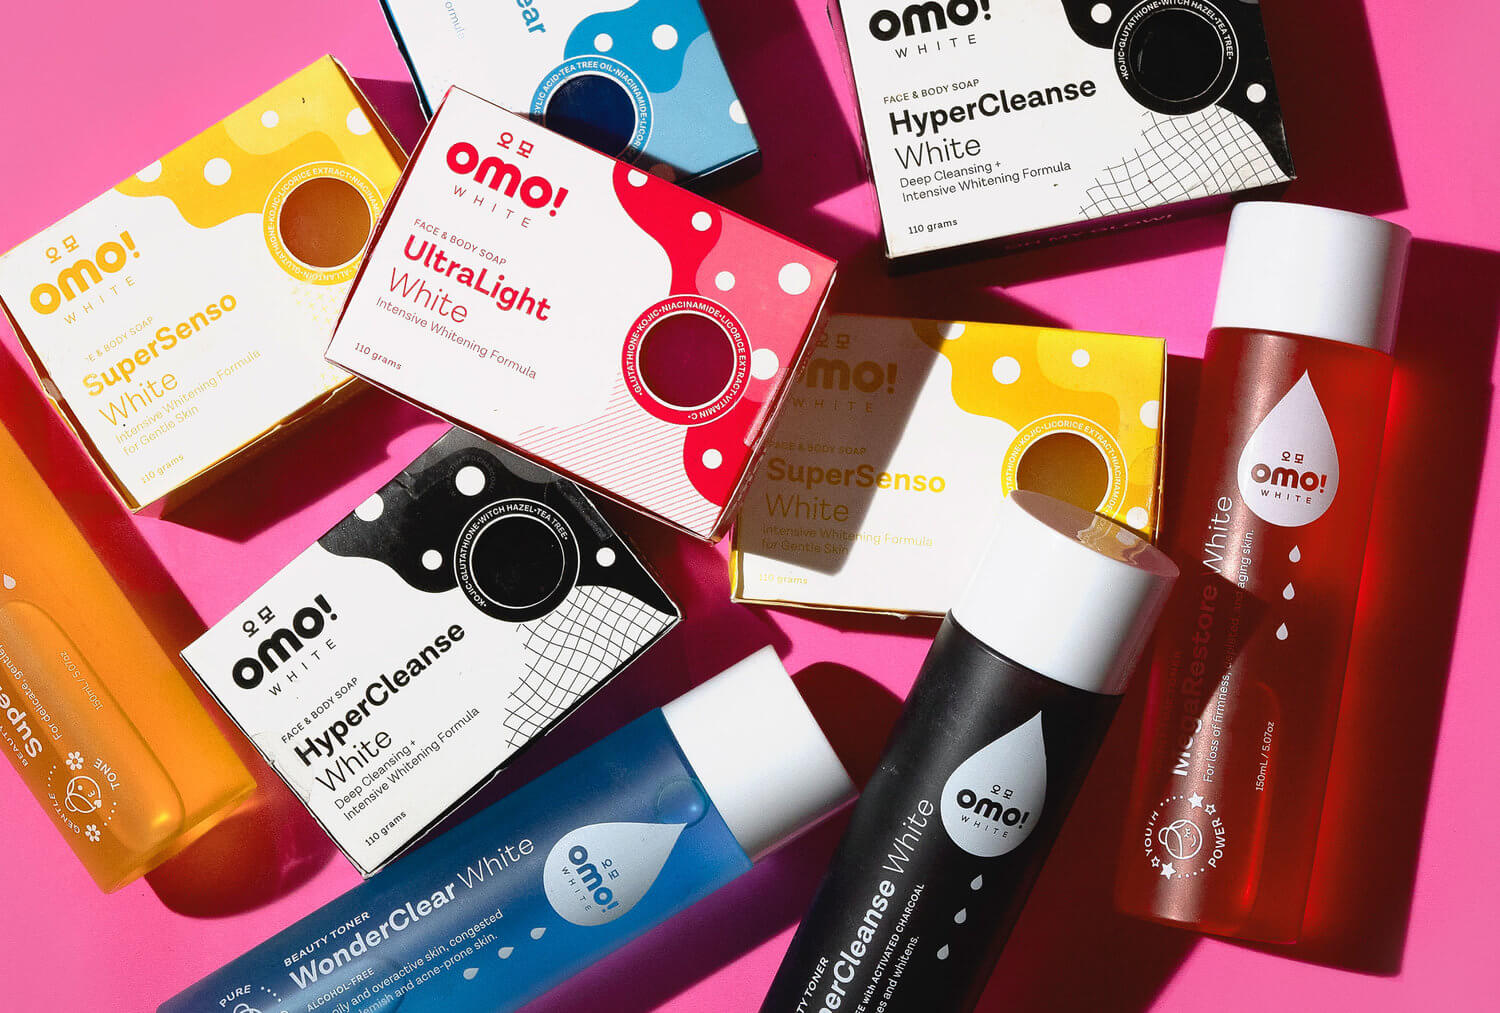 A flatlay of products and packaging designs for beauty and skincare brand Omo! White